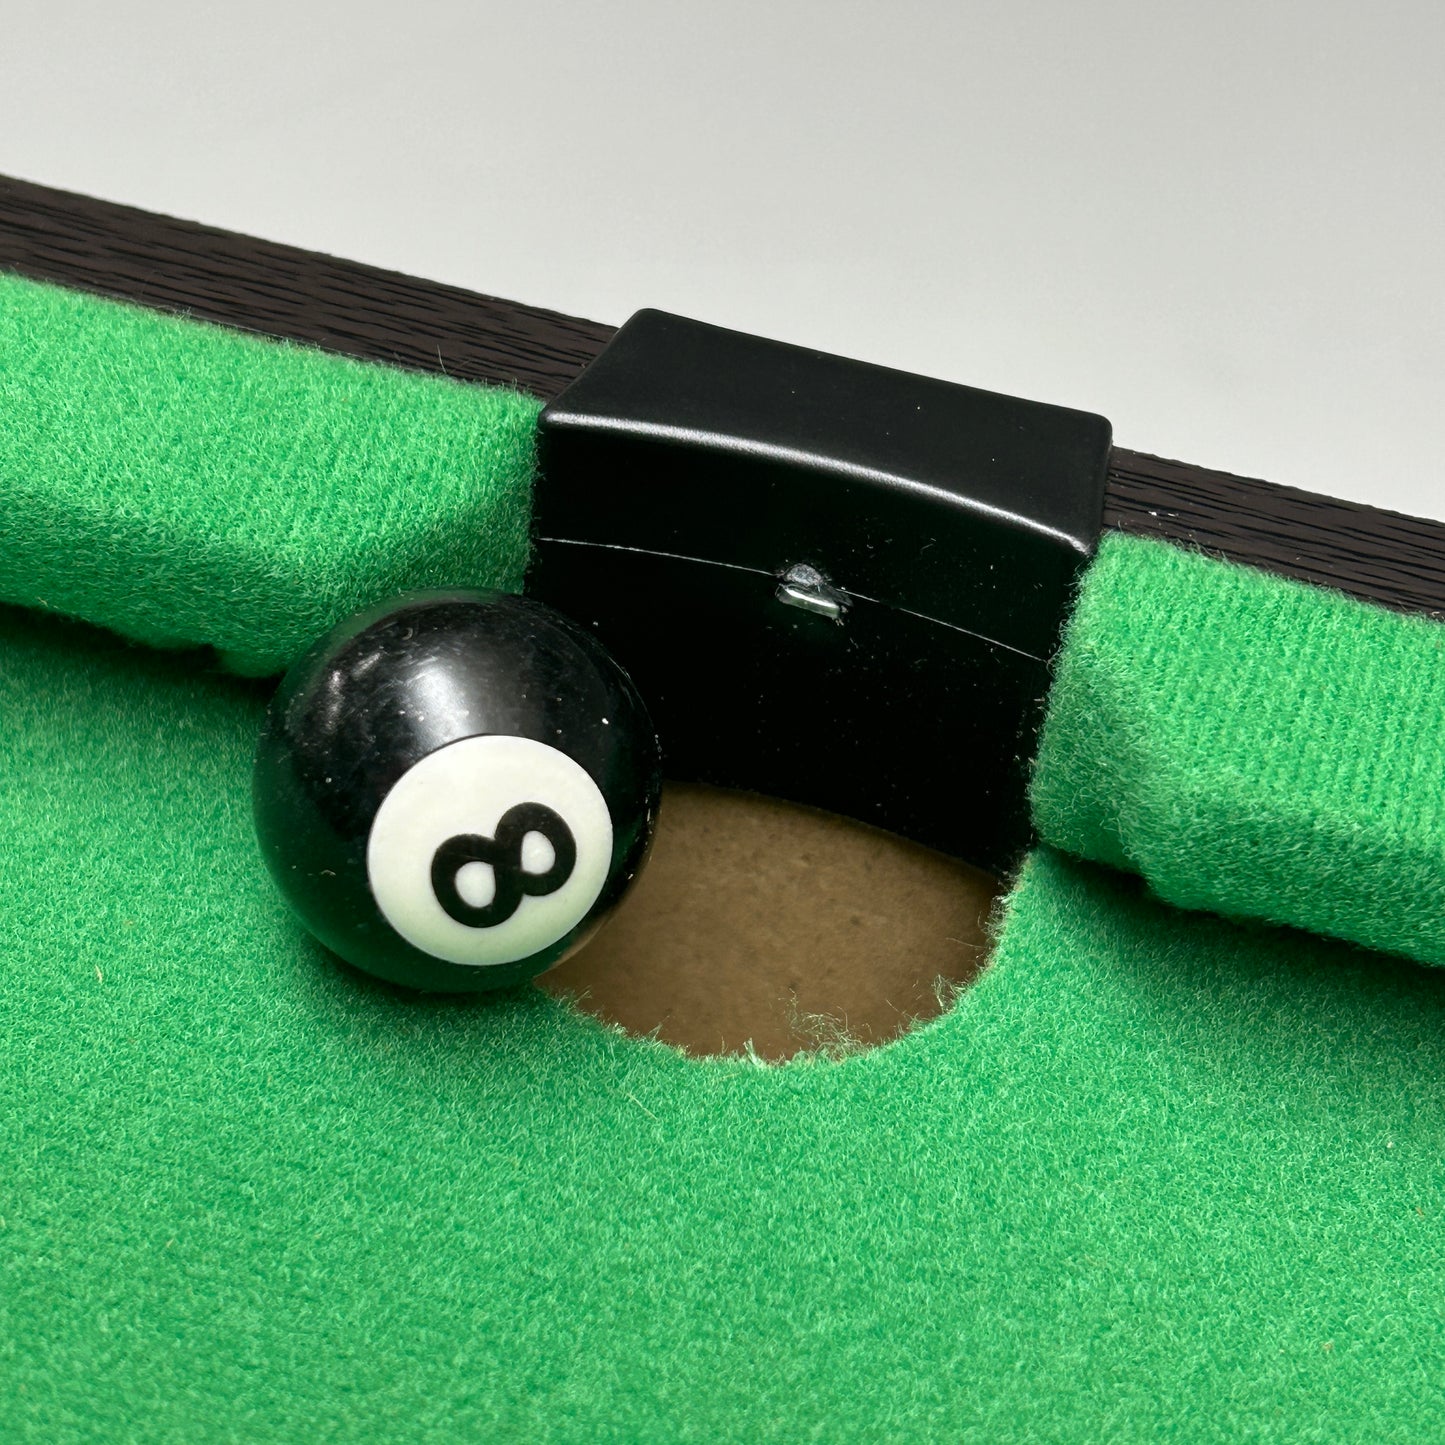 DAVE & BUSTER'S Miniature Pool Table 20 inch Billiards 14326 (New)